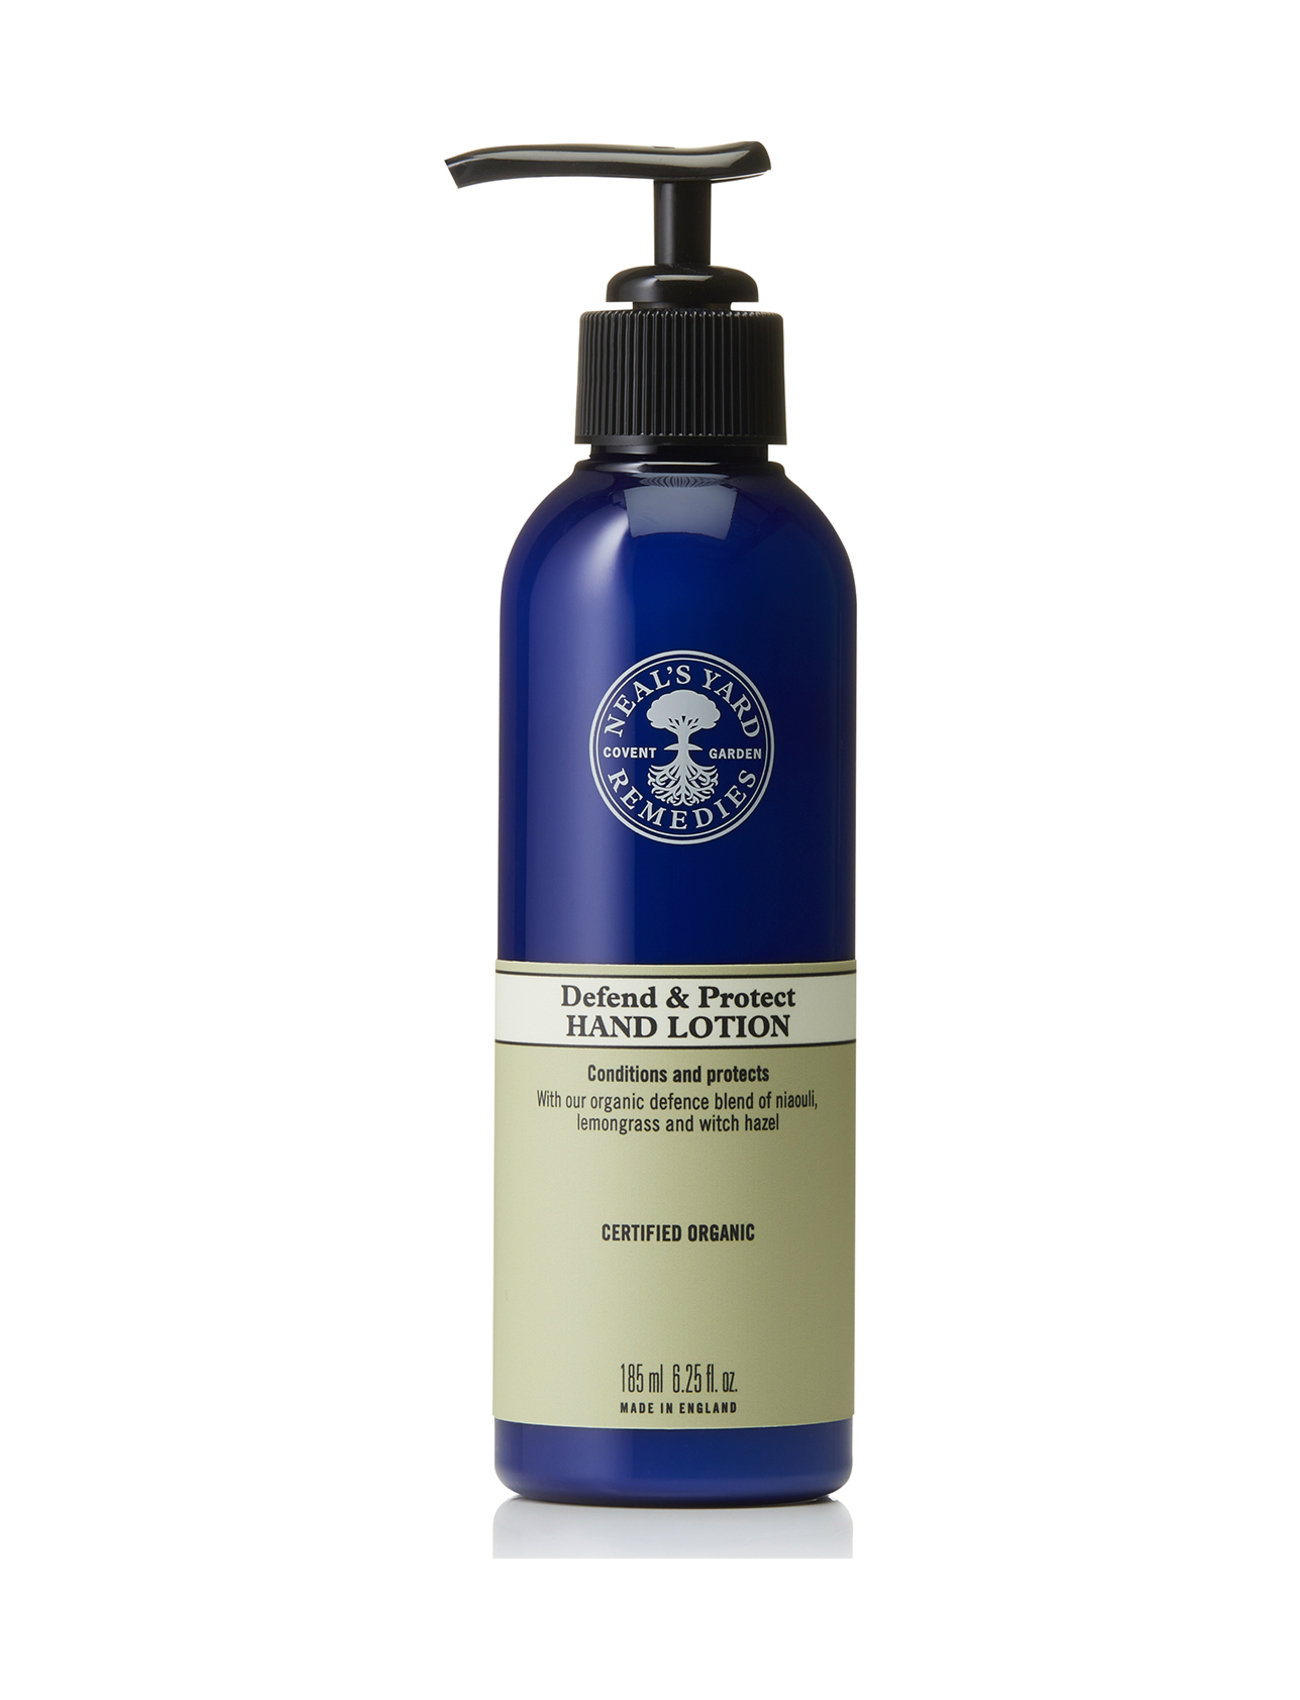 Defend And Protect Hand Lotion Beauty MEN Skin Care Body Hand Cream Nude Neal's Yard Remedies